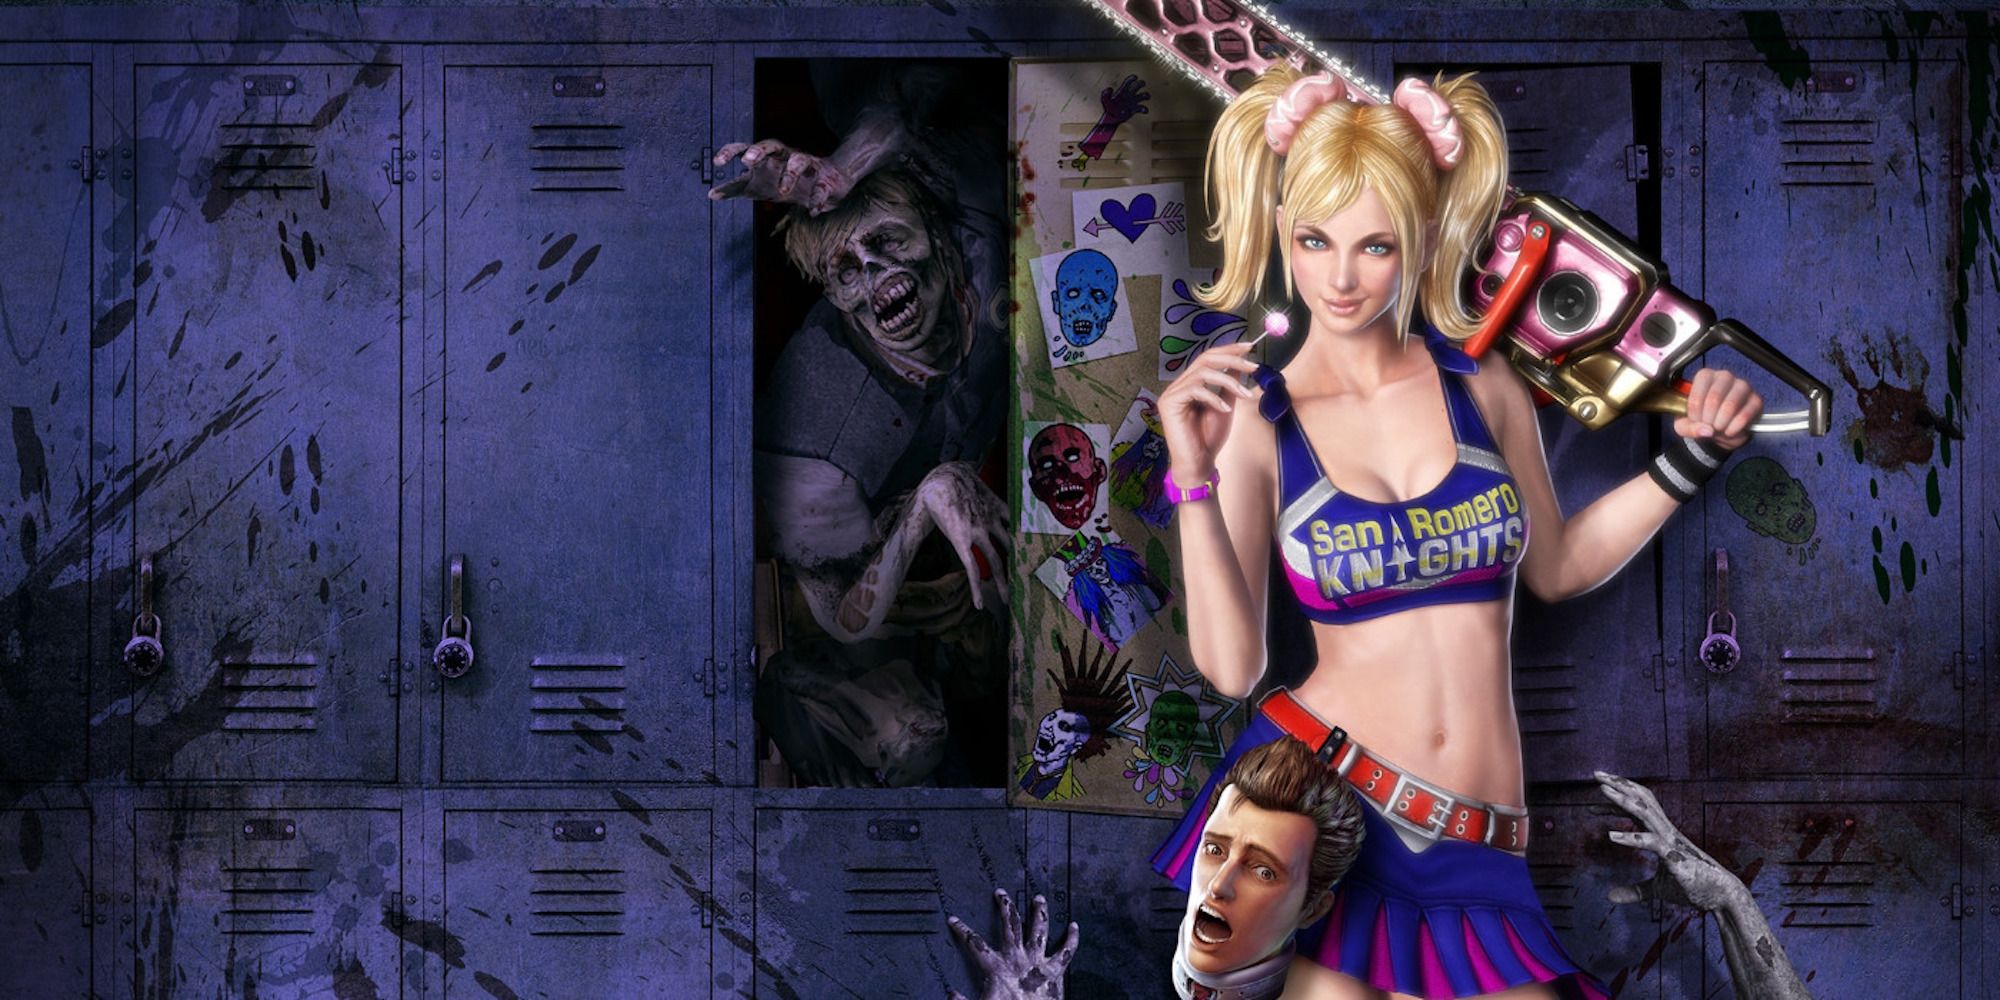 Promo art featuring the character Juliet from Lollipop Chainsaw